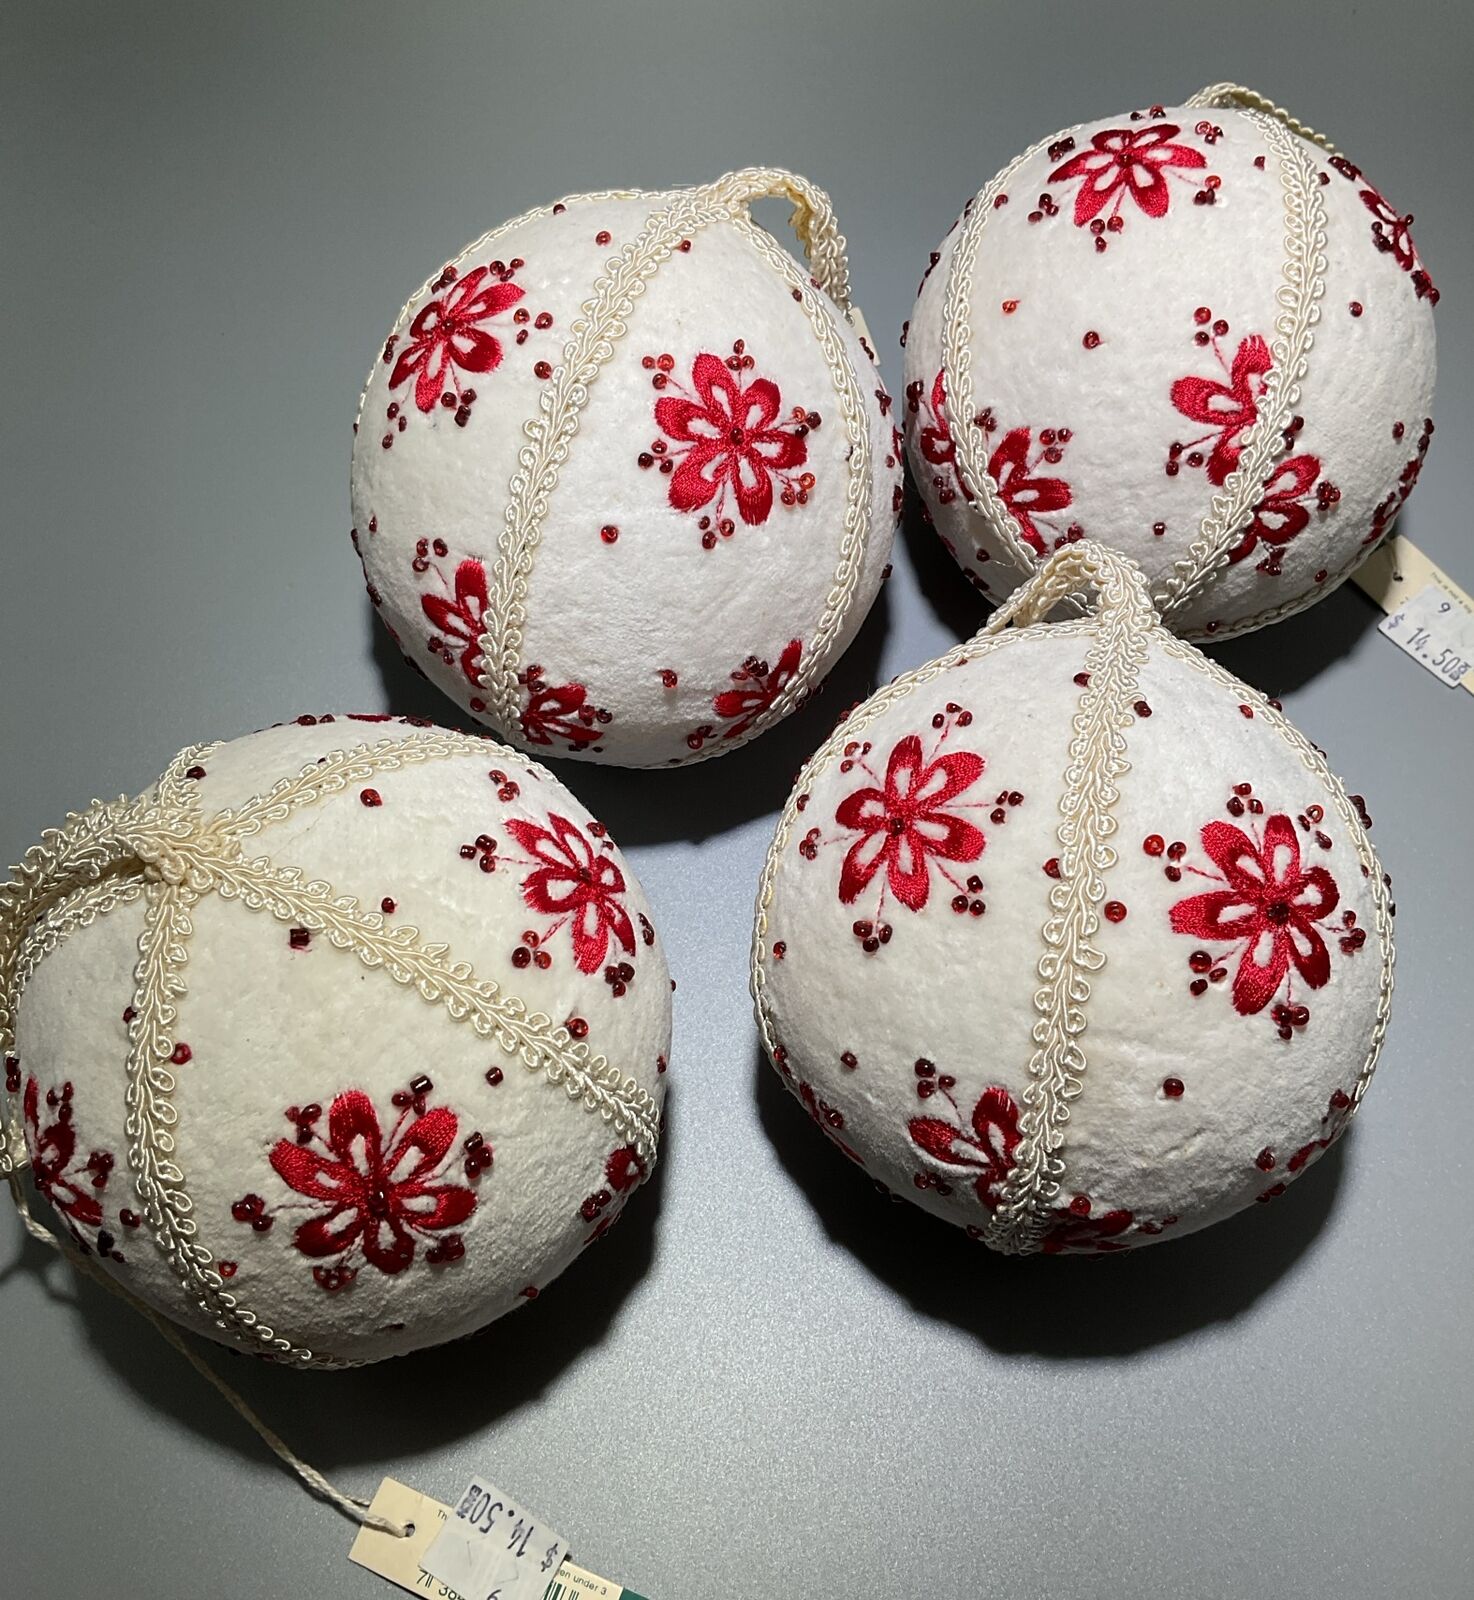 Vintage Floral Balls Christmas Ornaments Red White Midwest Cannon Falls 4pcs